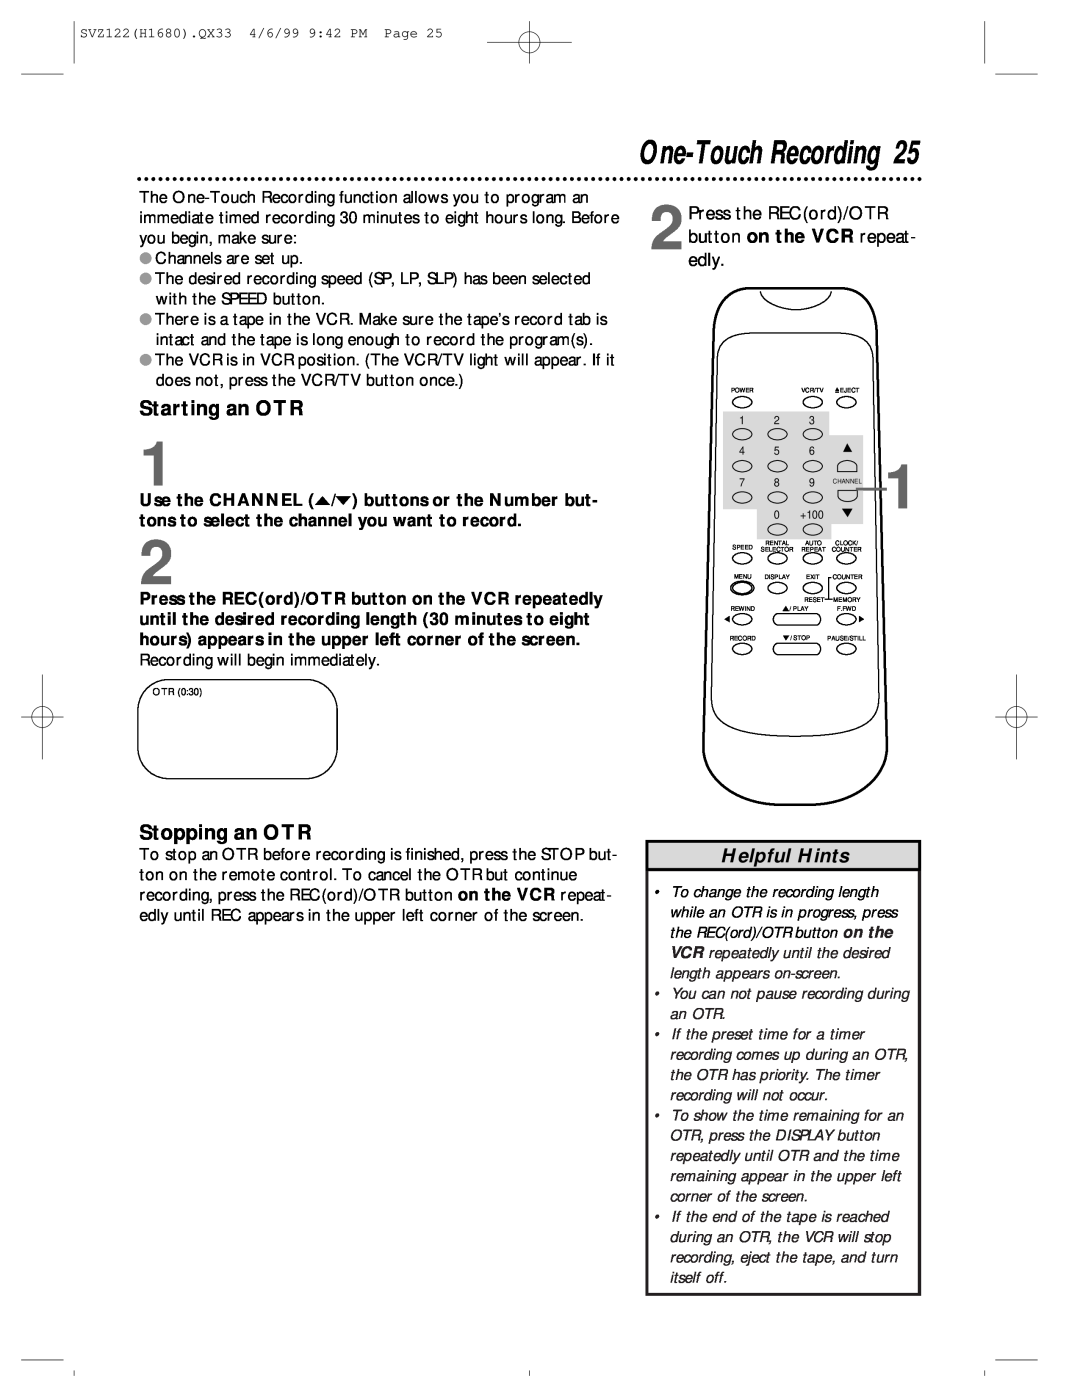 Philips SVZ122 owner manual One-Touch Recording, Starting an OTR, Stopping an OTR, Helpful Hints 